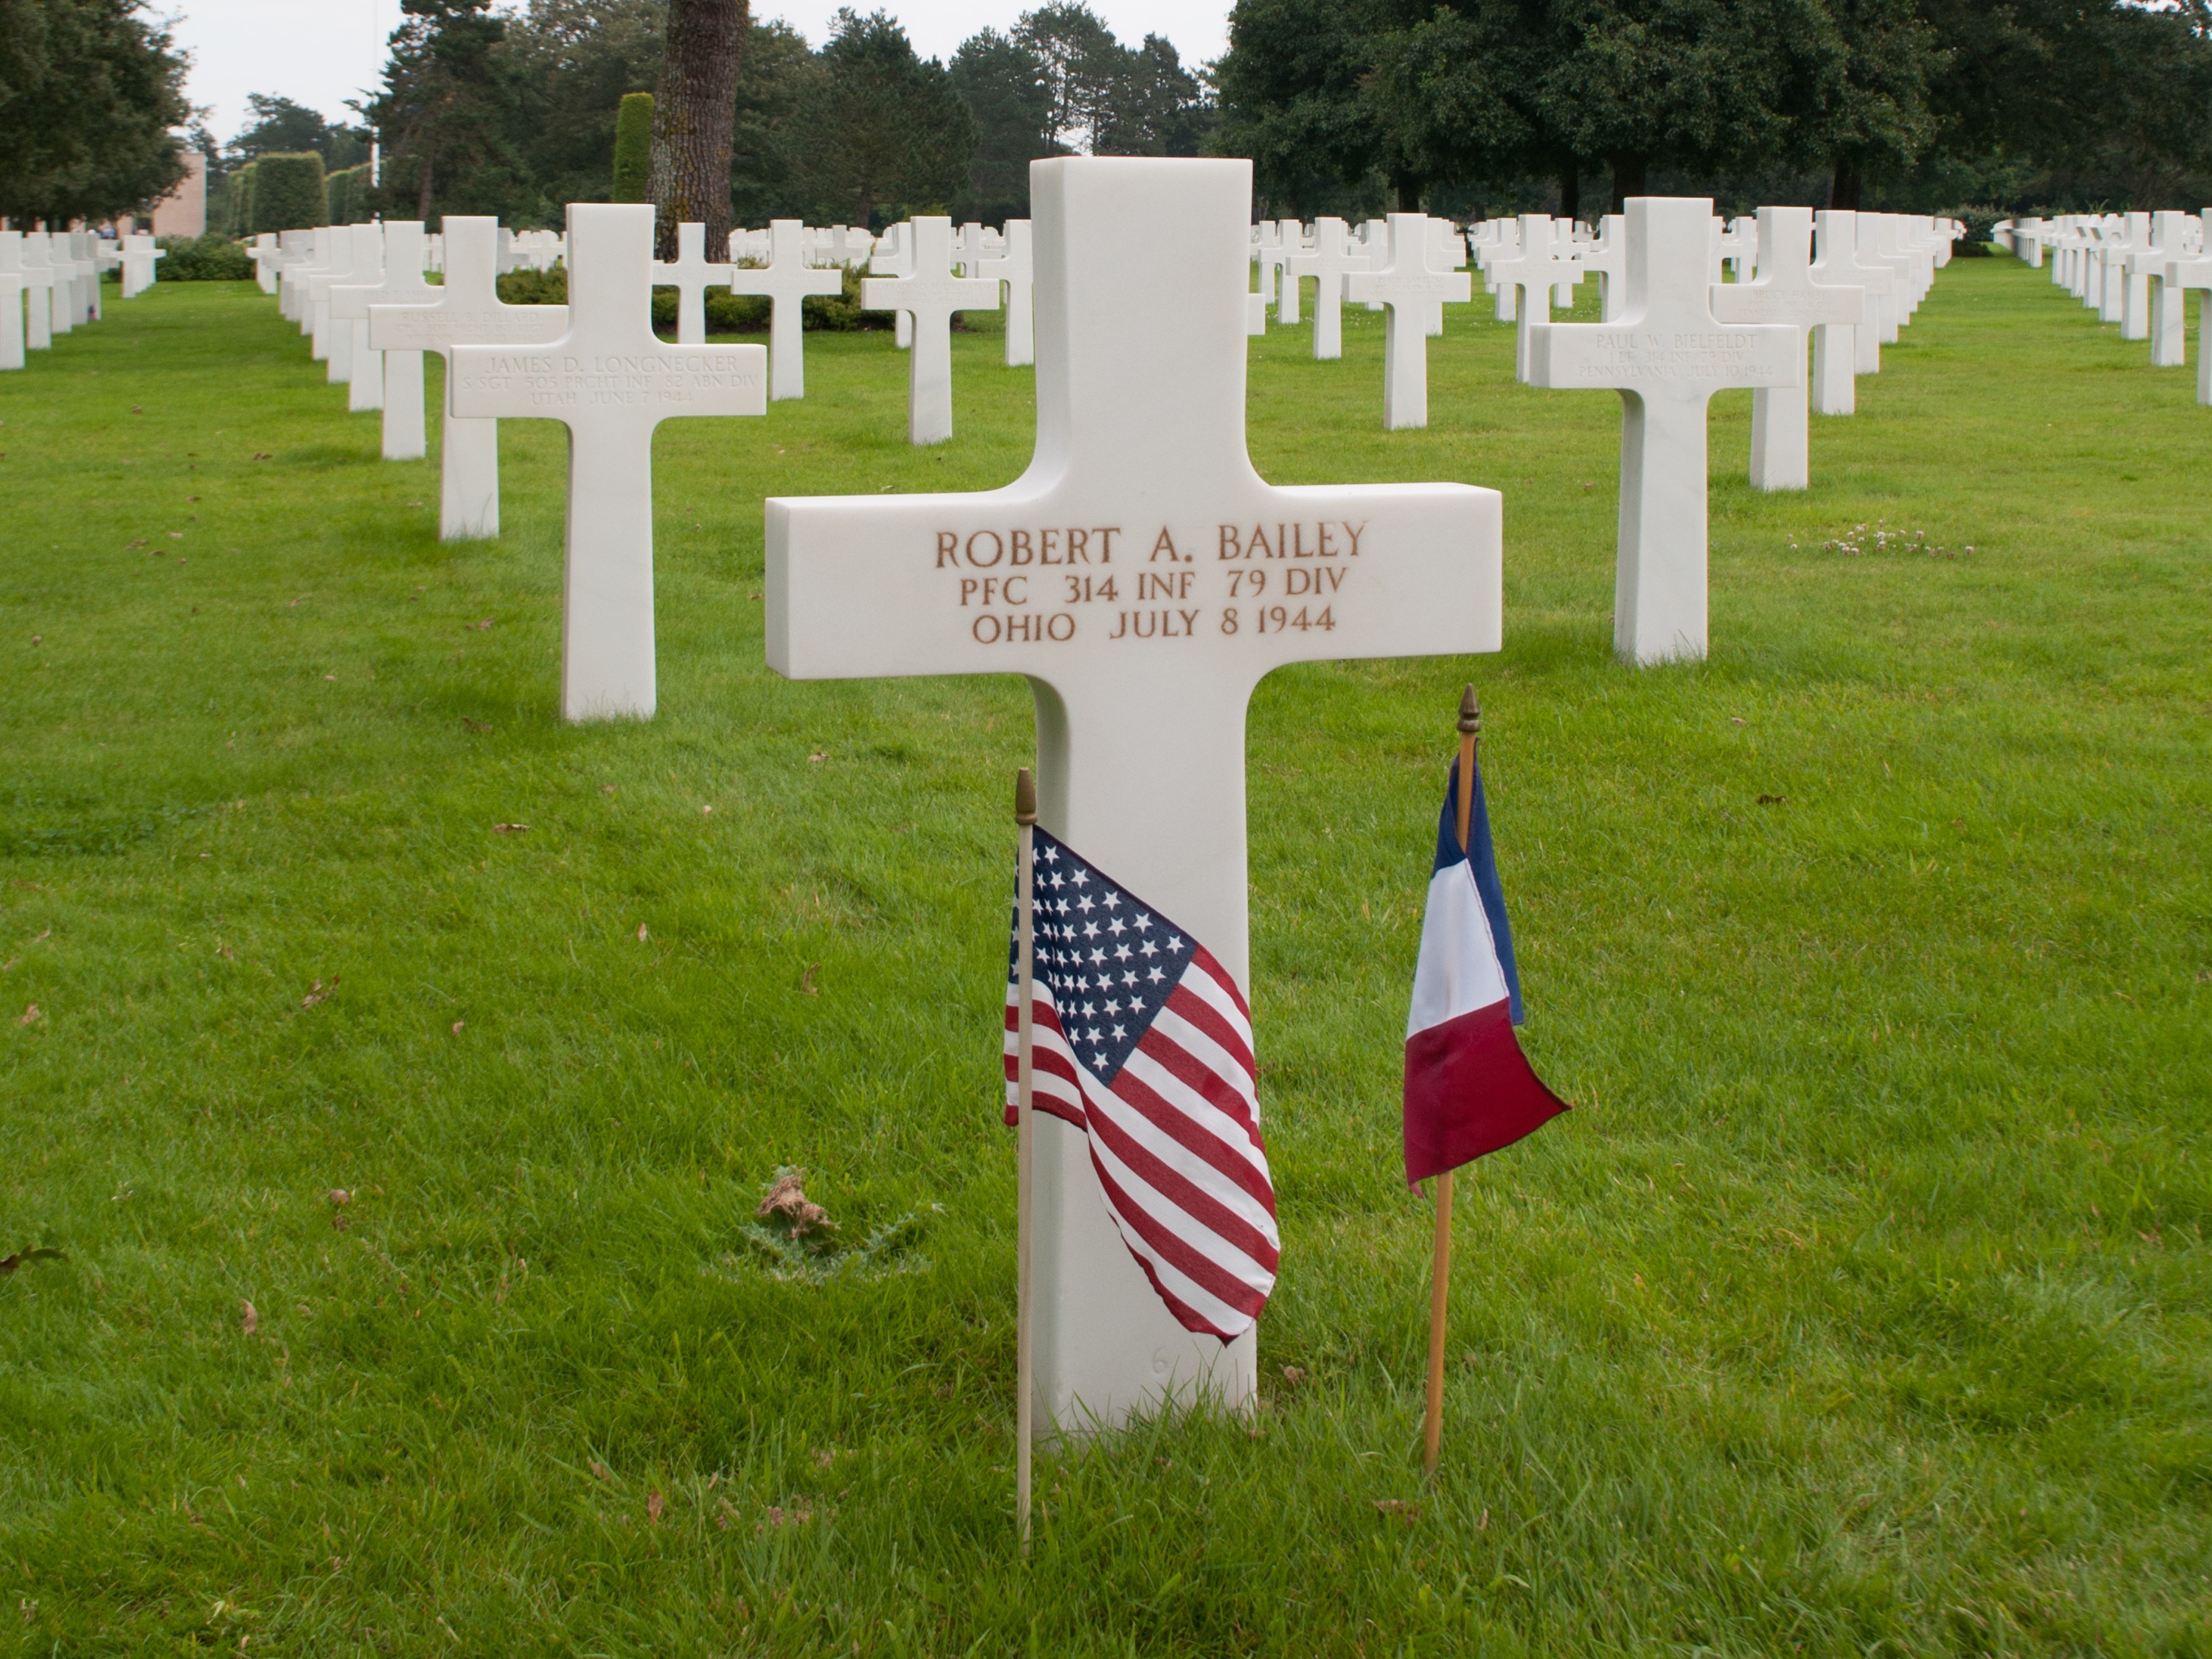 Grave of Robert A. Bailey at Normandy American Cemetery